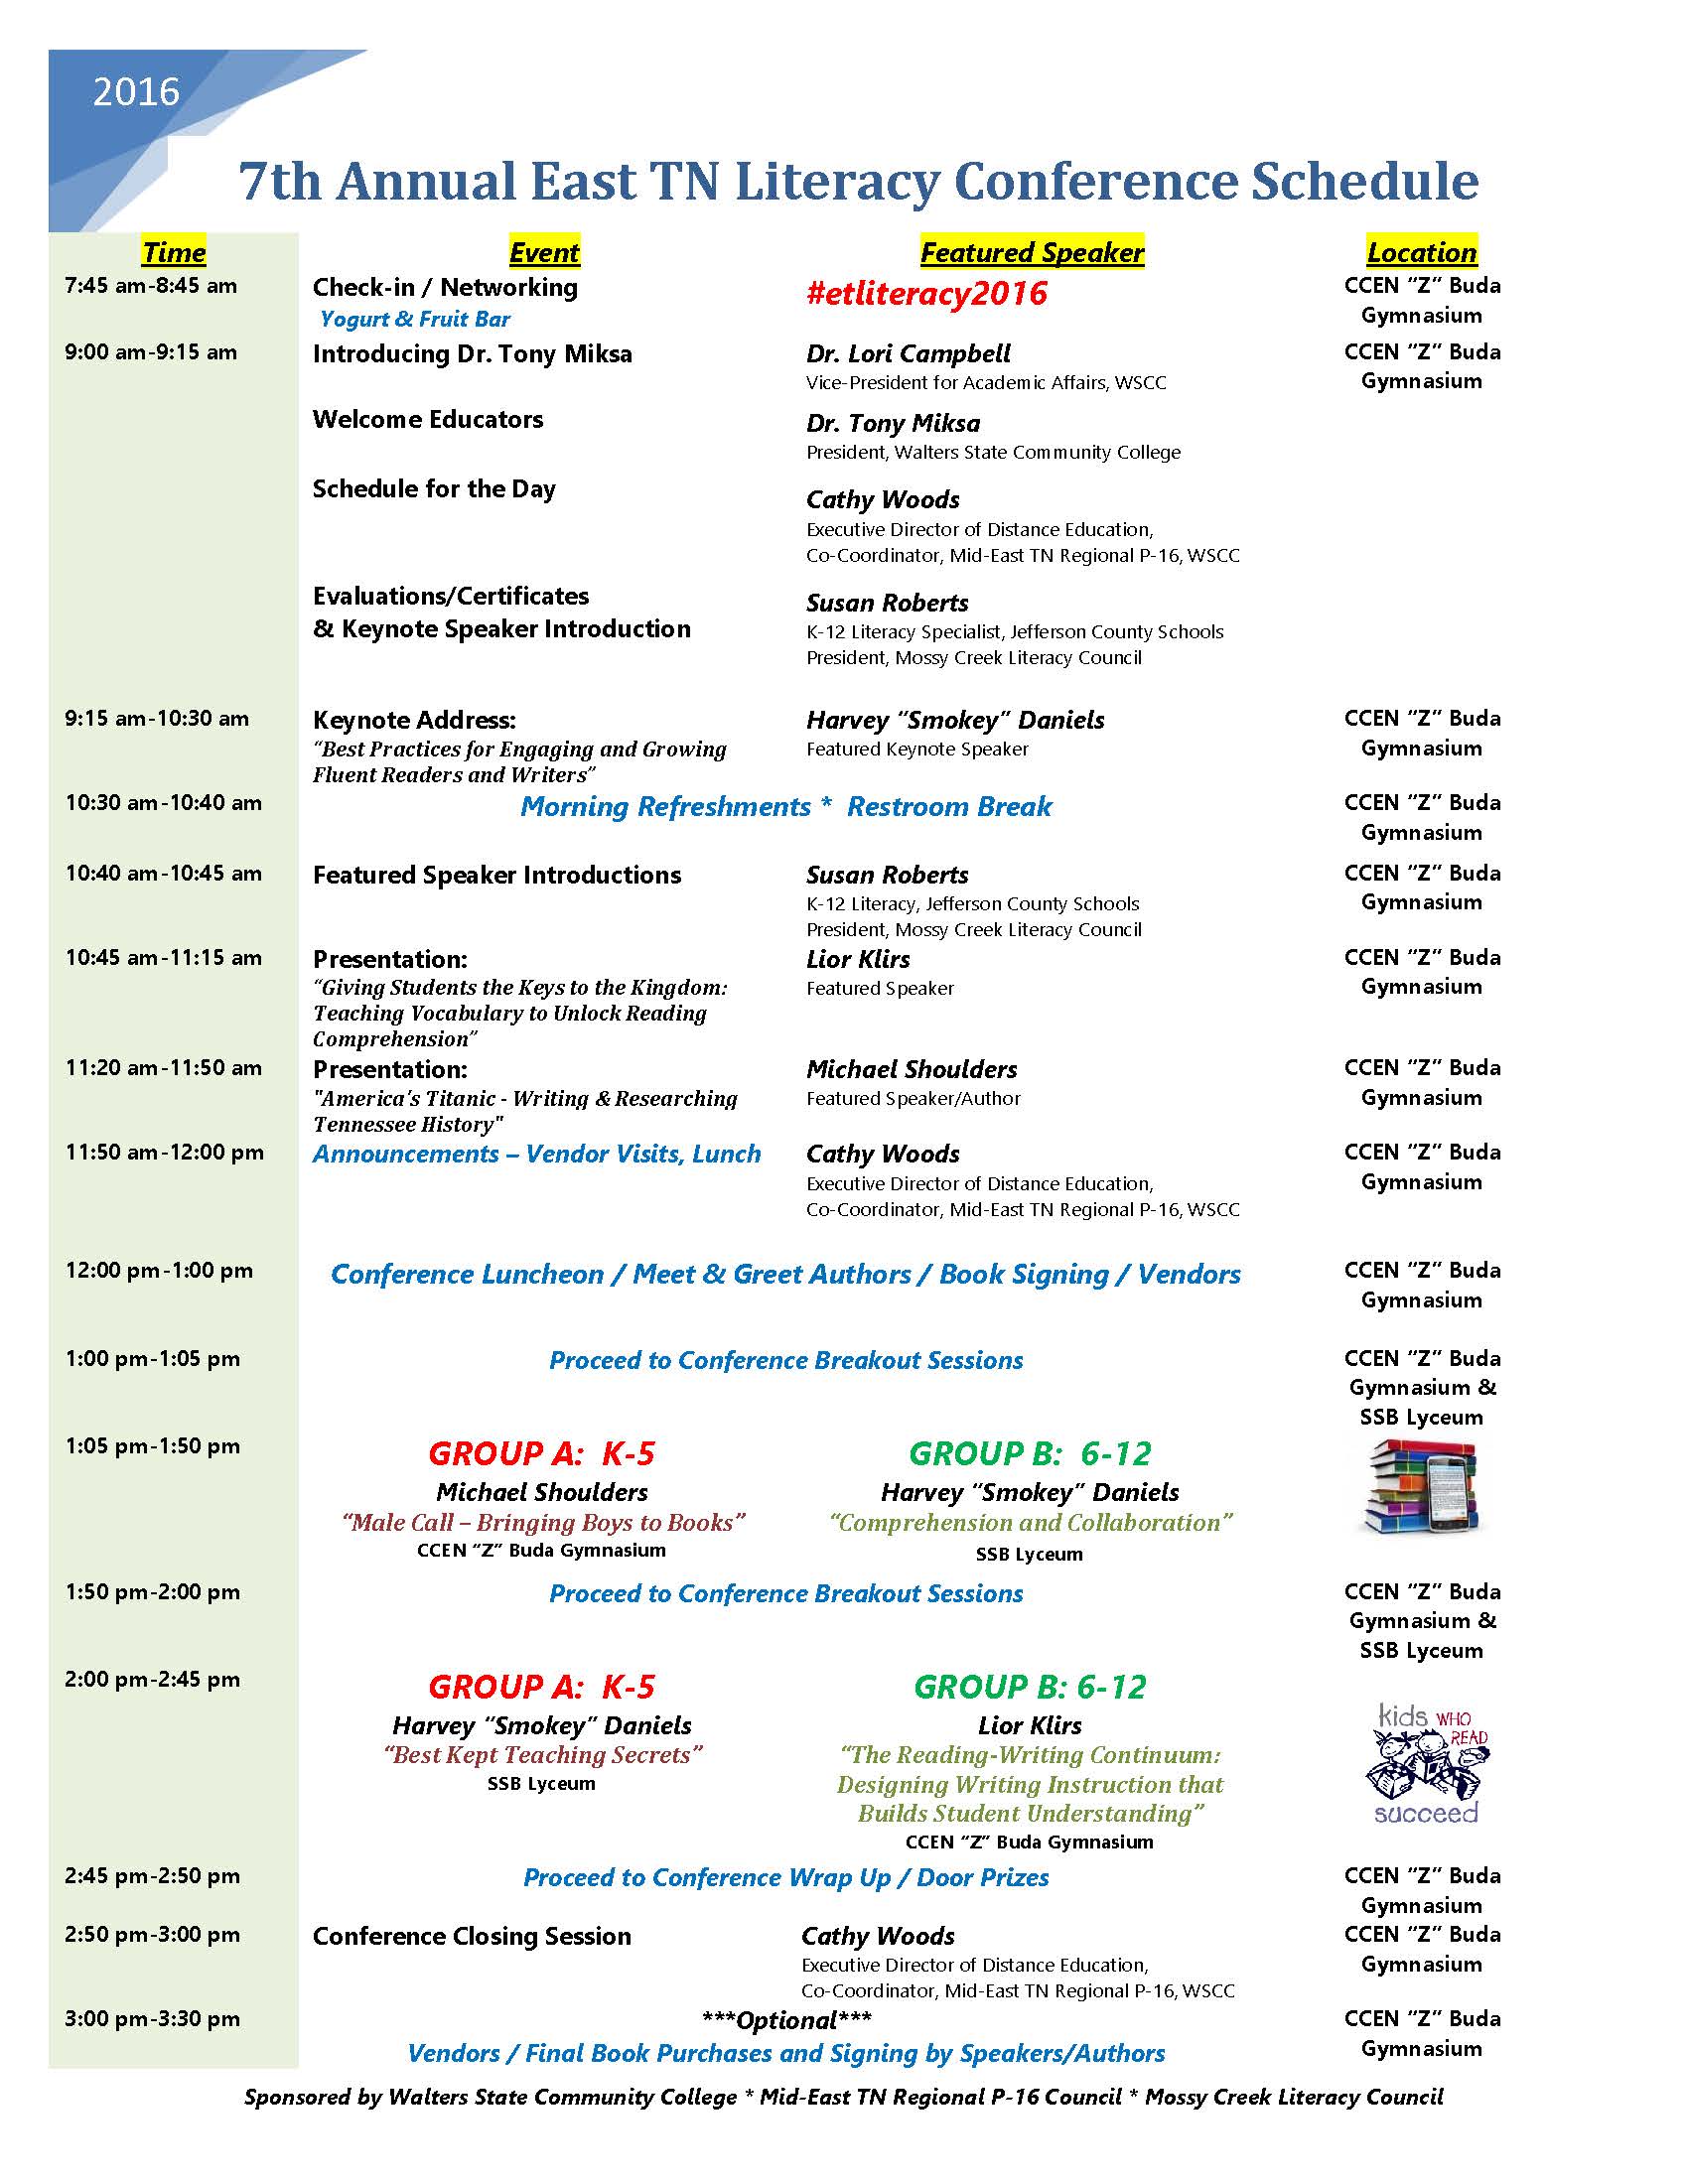 7th Annual Literacy Conference Schedule